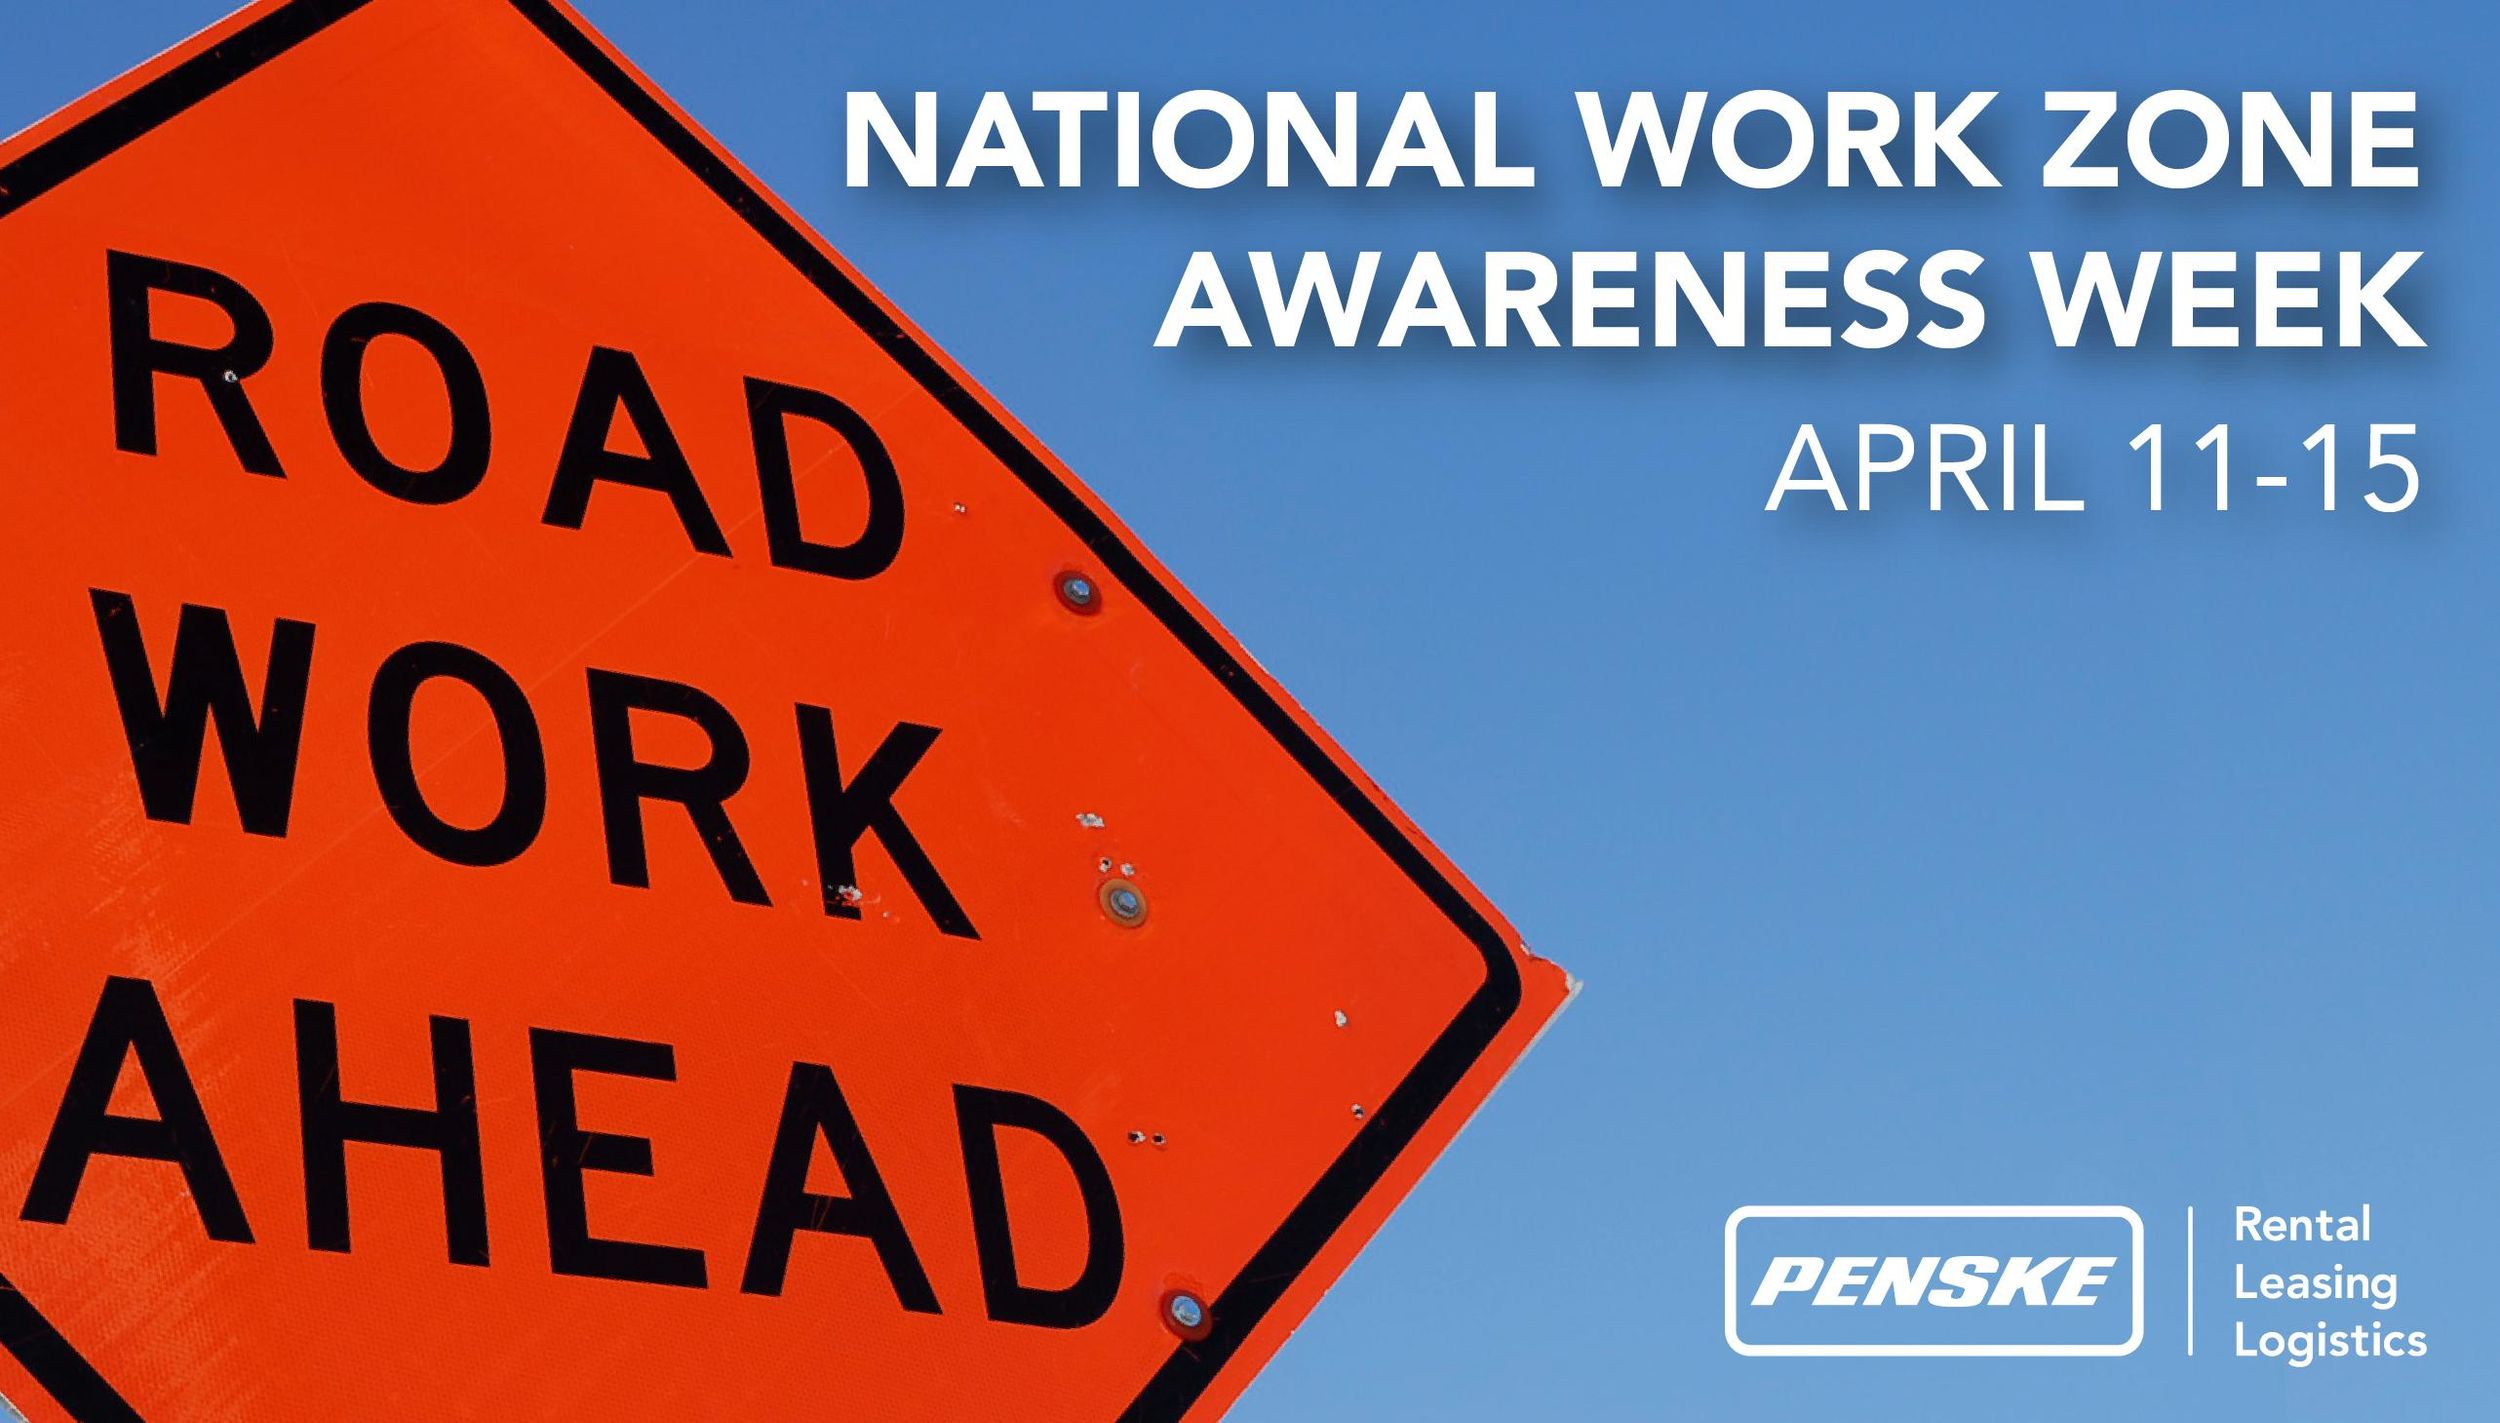 Awareness Campaign Promotes Safety in Work Zones